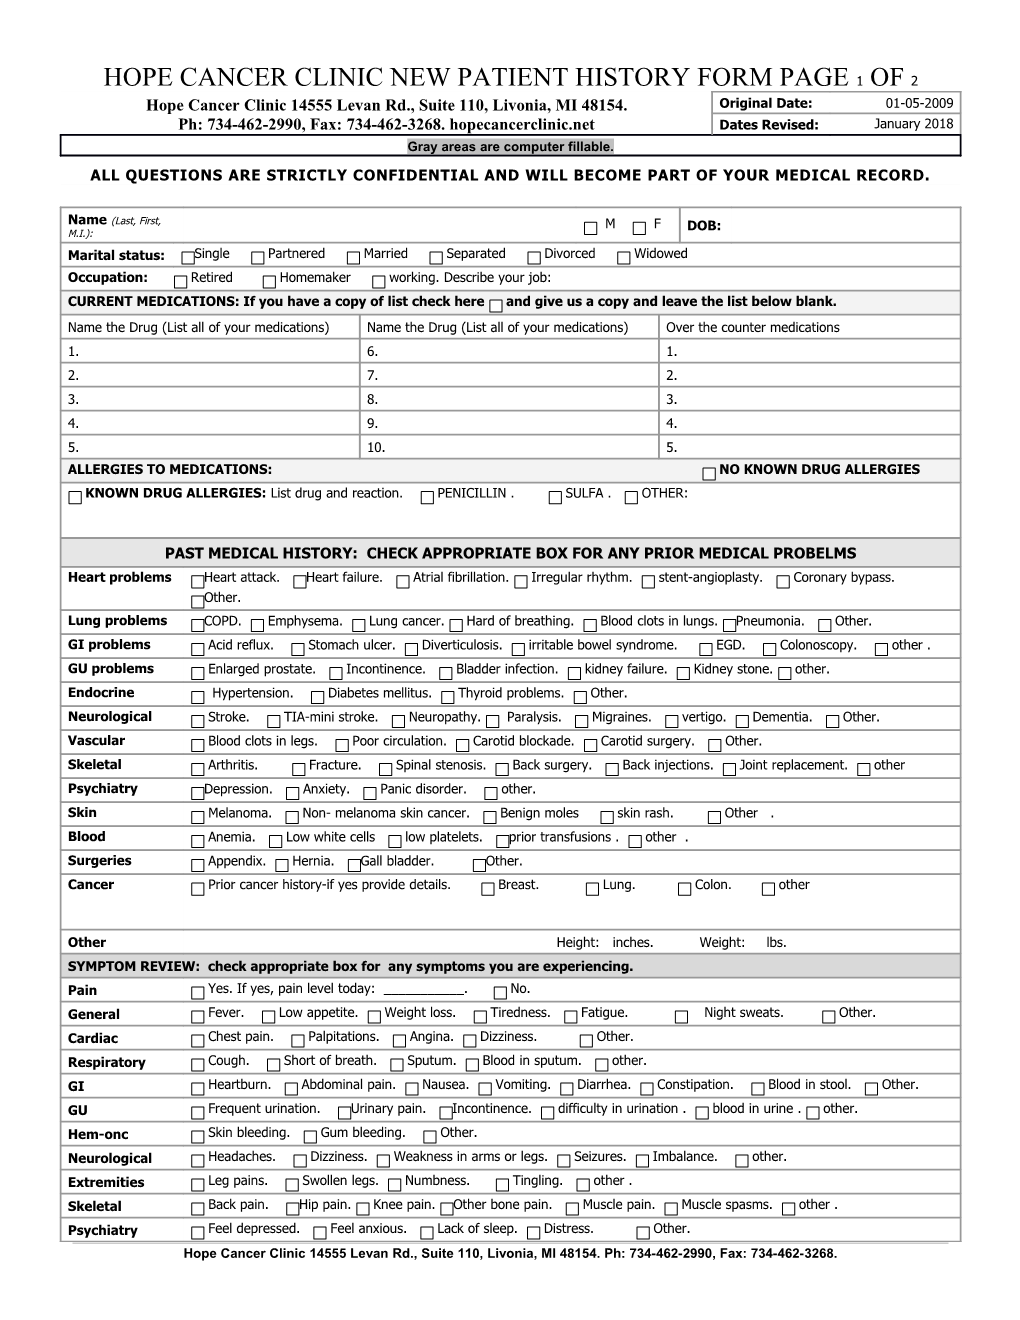 Hope Cancer Clinic New Patient History Form Page 1 of 2